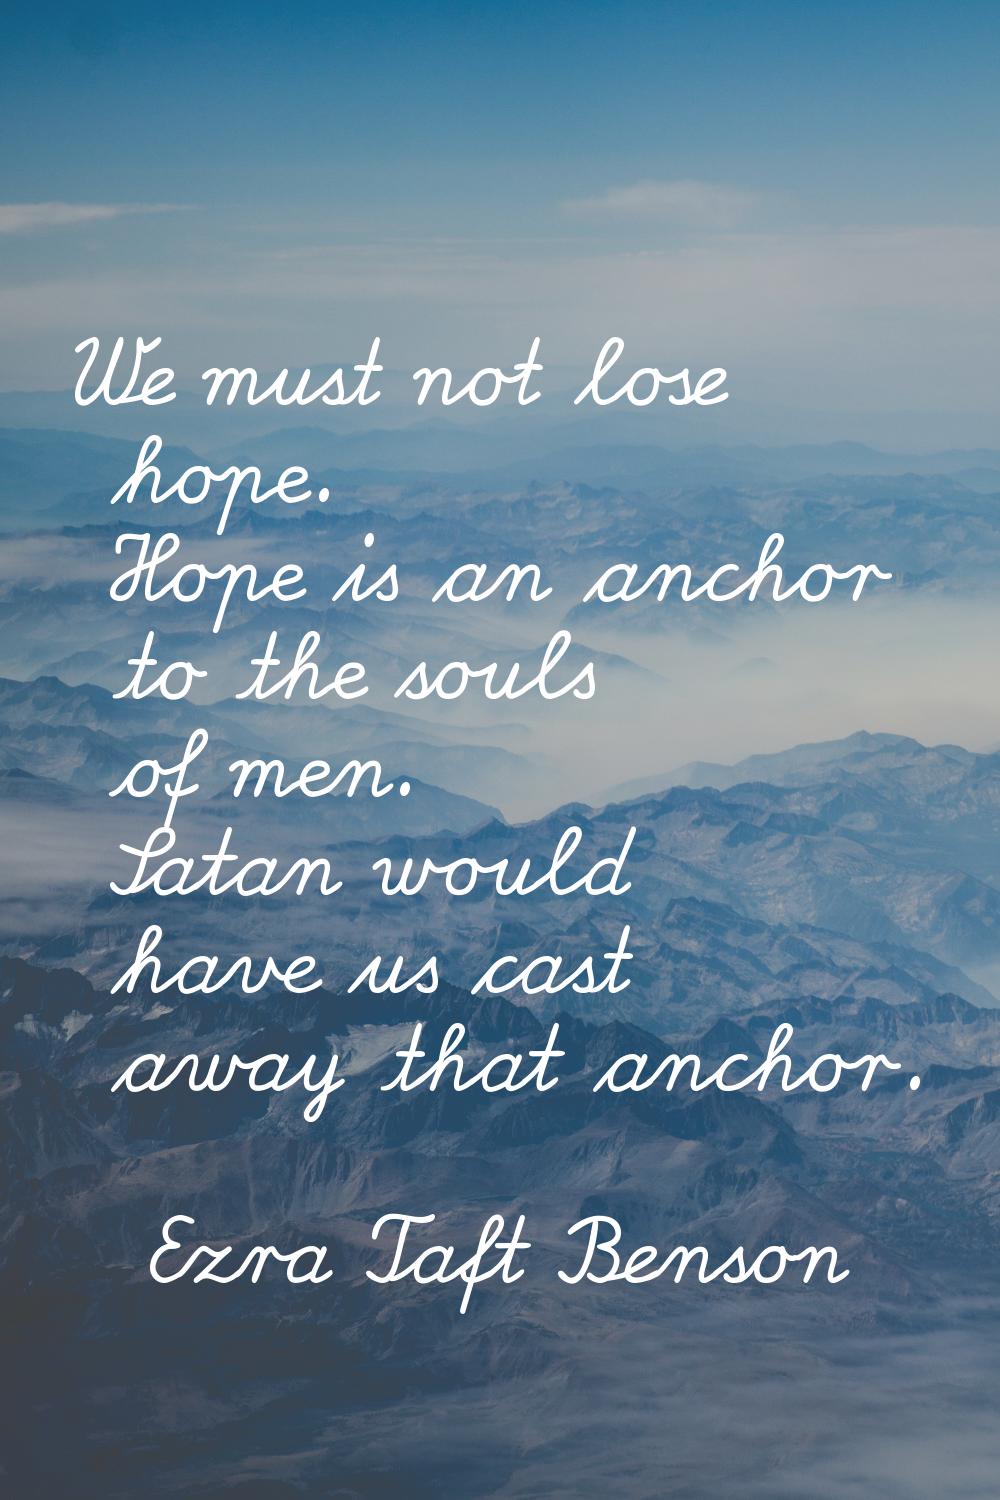 We must not lose hope. Hope is an anchor to the souls of men. Satan would have us cast away that an